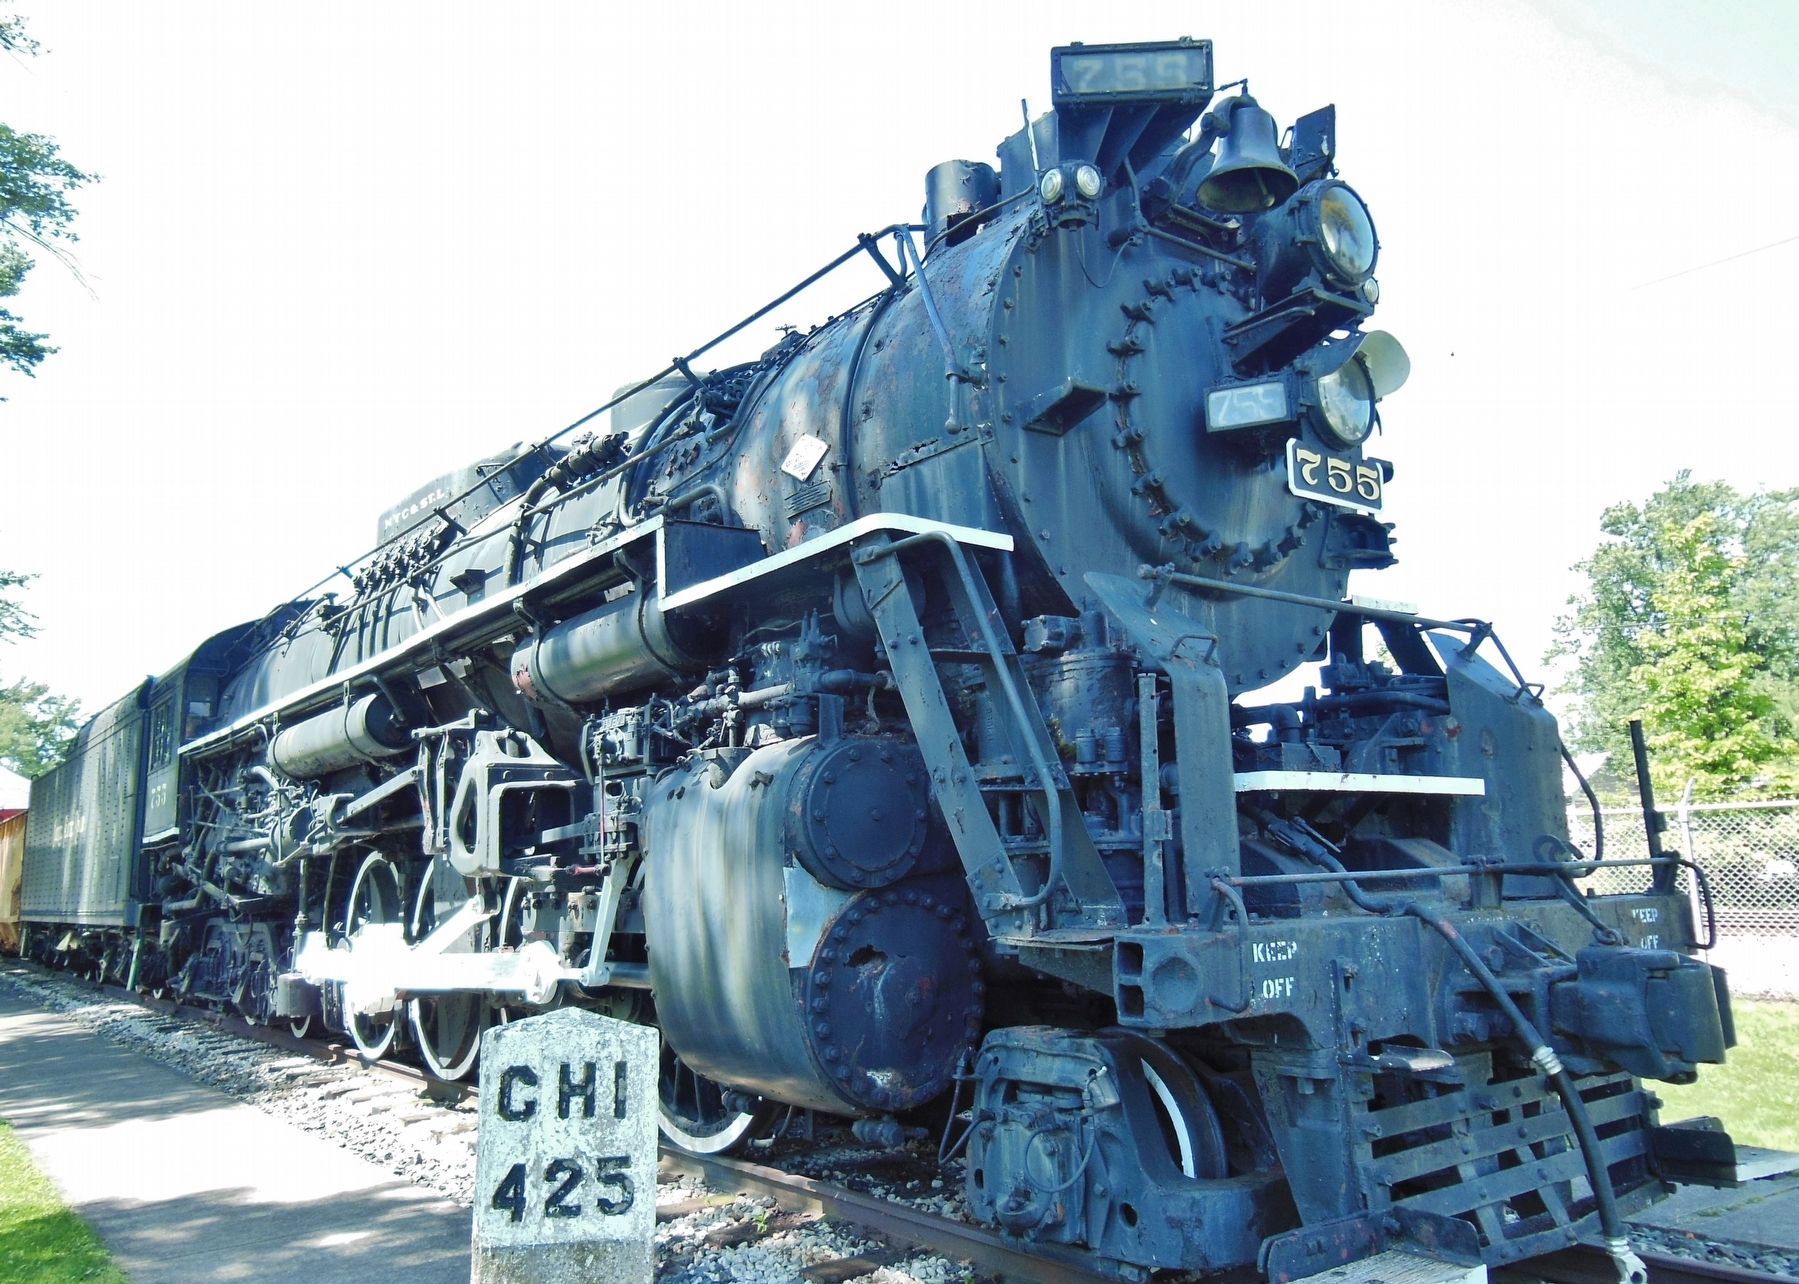 Nickel Plate Road Berkshire Locomotive No. 755 image. Click for full size.